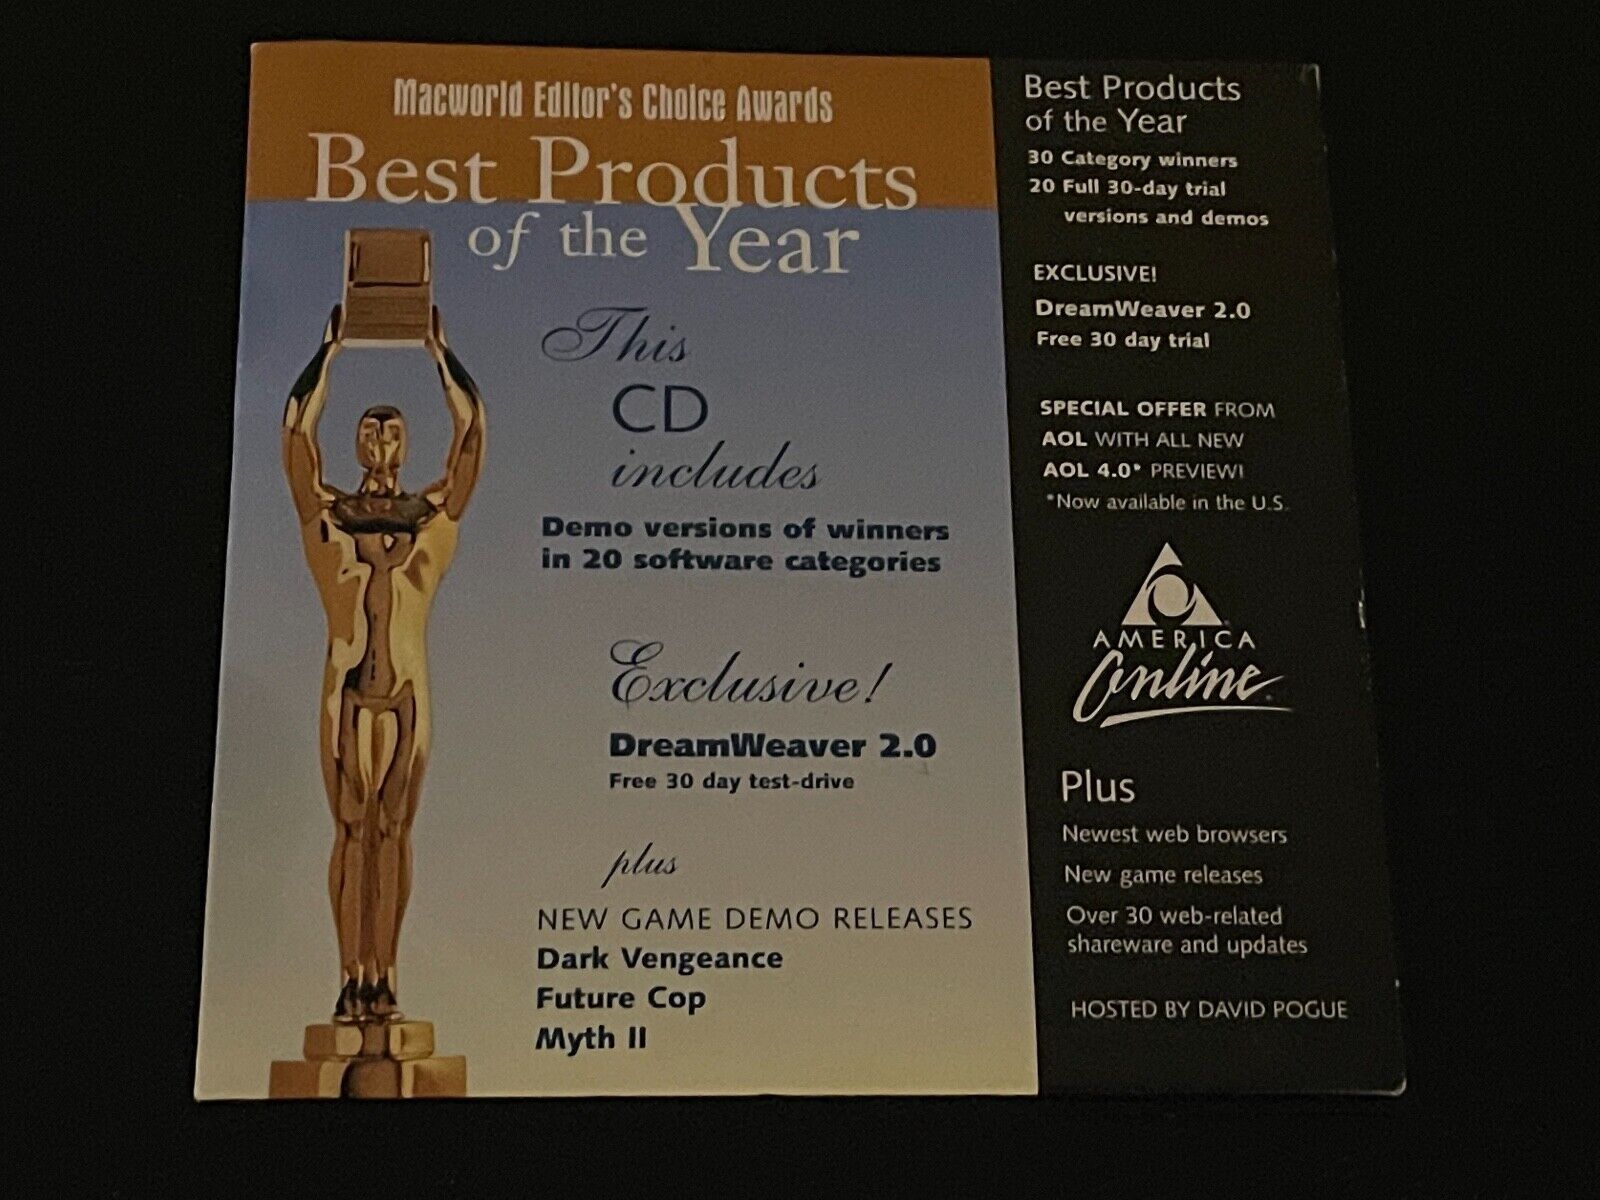 Vintage Apple Macworld Editor's Choice Awards Best Products of the Year 1999 CD